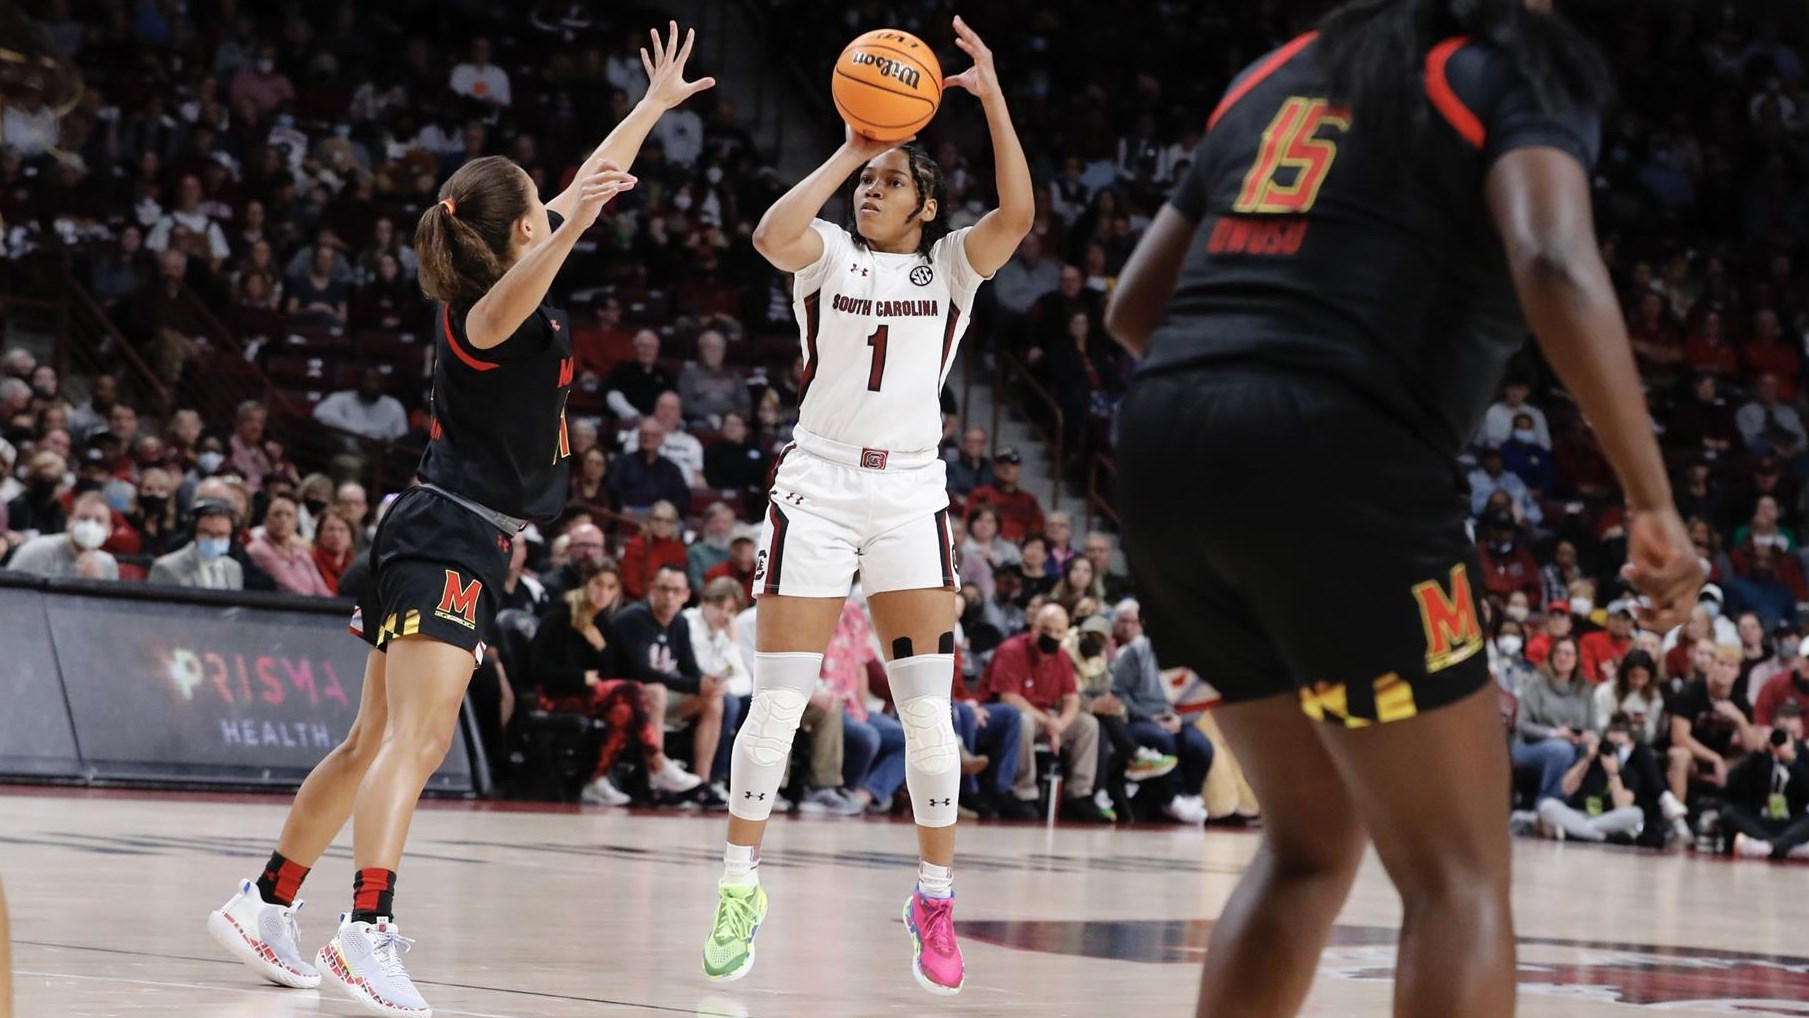 Cooke leads No. 1 Gamecocks to 66-59 win over No. 8 Terps